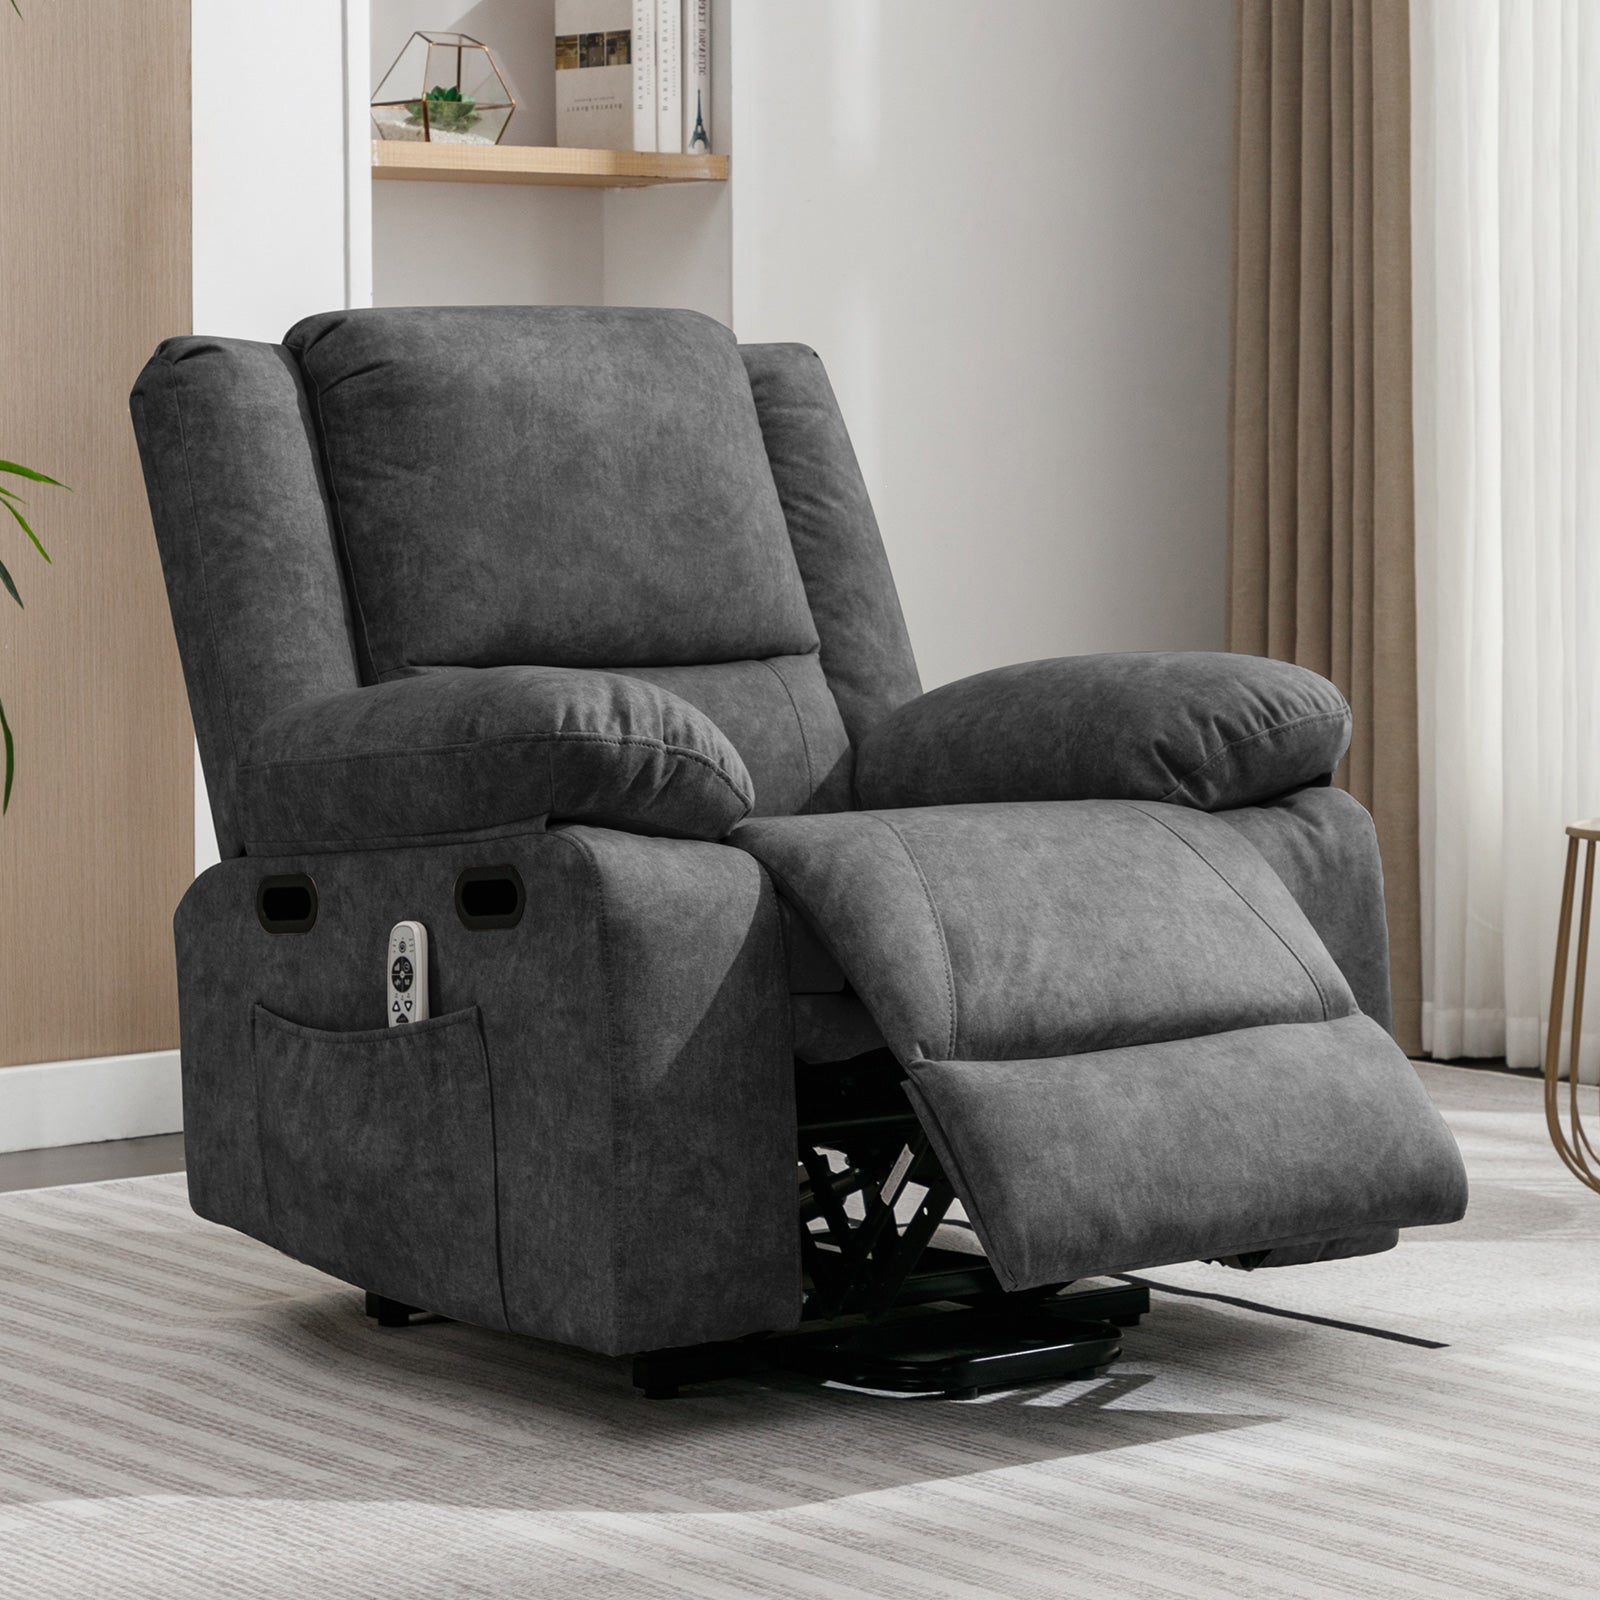 Mjkone Recliner Chair for Adults, Electric Glider Recliner with Heat Vibration Function, Upholstered Modern Massage Chair with Overstuffed Armrest Backrest for Living Room Apartment Studio